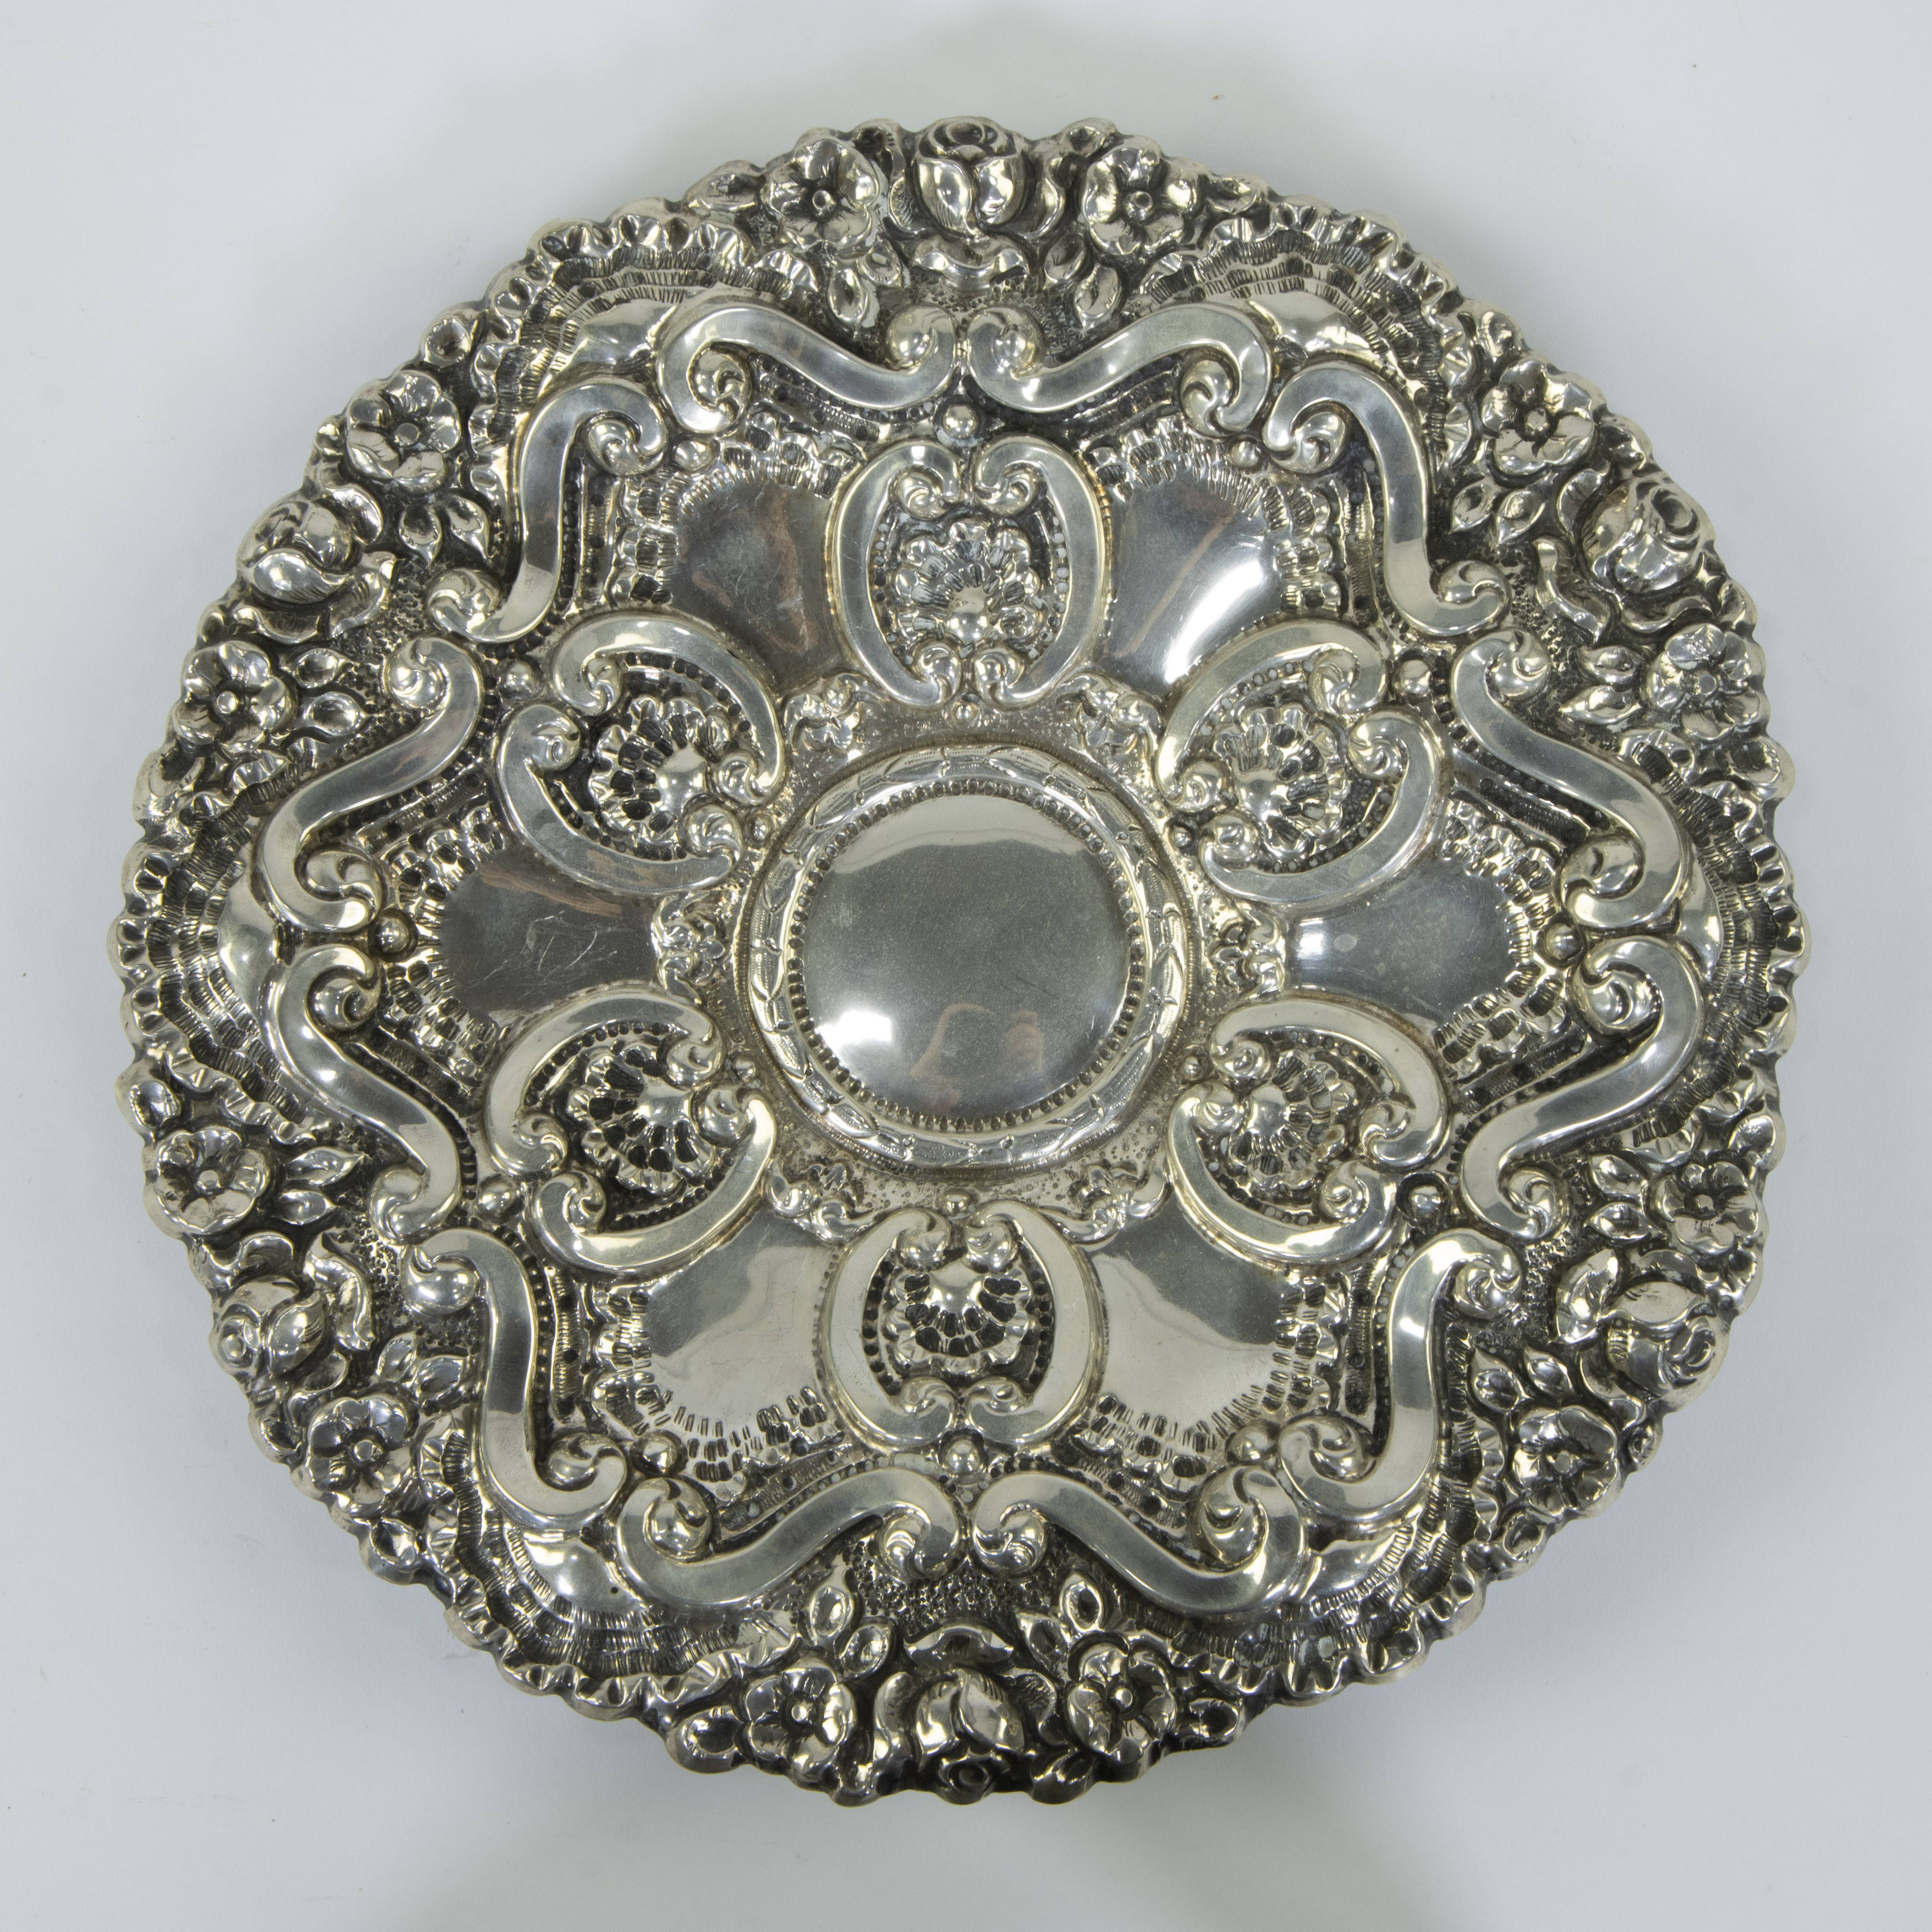 2 silver dishes, repoussé - Image 3 of 6